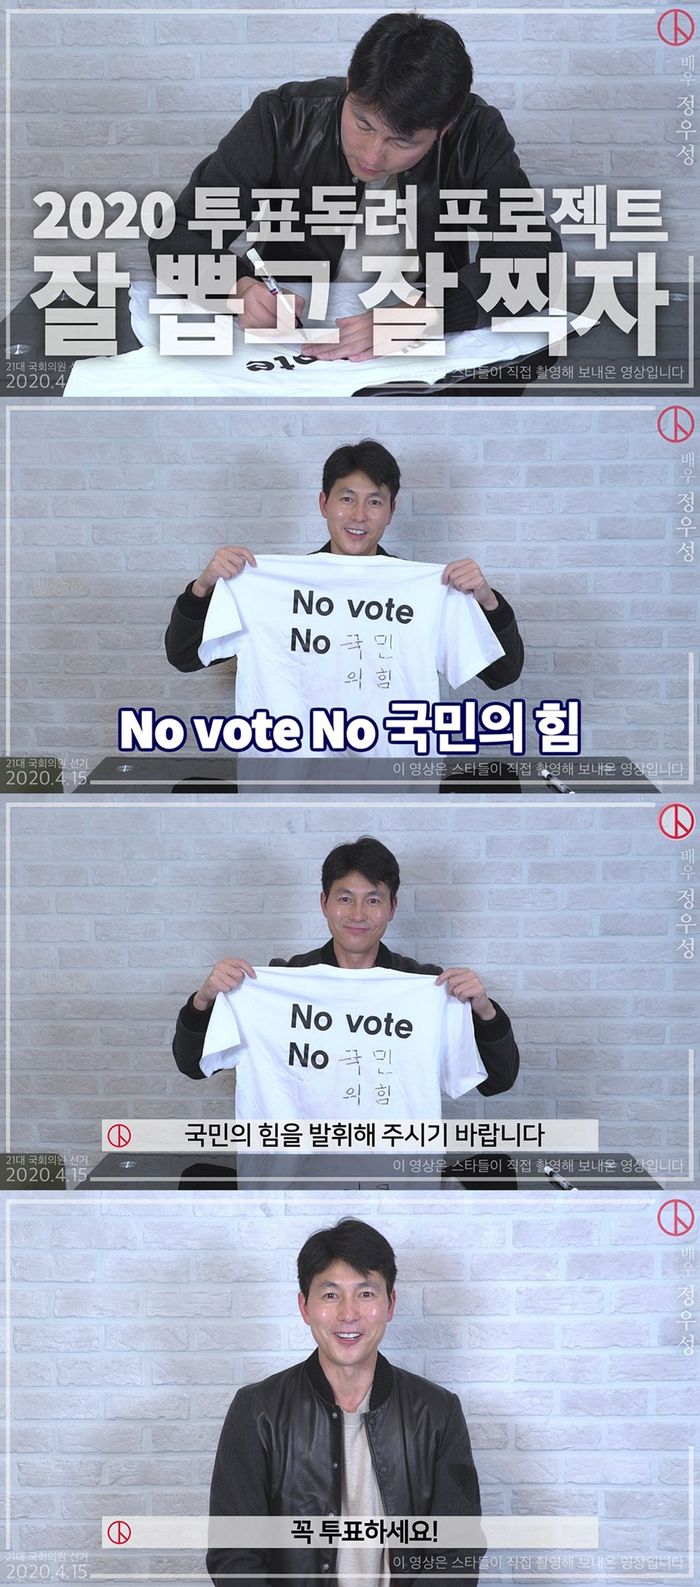 Actor Jung Woo-sung delivered this message through the campaign to encourage voting in the 415 parliamentary election Lets pick well and take good pictures.In a video released through the National Election Commission official YouTube, Jung Woo-sung wrote BinCannes as the power of the people in the NO VOTE NO ( ) of T-shirts in the Voting Gift Set box delivered by the organizers.Jung Woo-sung said, I think the power of the people is the most important factor in protecting North Korea. I hope that the people will exert their power on your Voting to protect North Korea.Jung Woo-sung said, What kind of Korea do you want?Want to create a country like that where children and senior citizens who can live healthy and safe have a chance for everyone happy? Voting, April 15.Im going to pick the representative I want - make sure you Voting!Lets Pick Well and Shoot Well is the third series following two campaigns: the 0509 Rose Project in May 2017 and the 613 Voting and Laughing in the June 2018 national simultaneous local elections.The two previous campaigns have been gathered by actors such as actors Ko So Young, Lee Byung Hun, Jung Woo-sung, and actors such as Yoo Jae-Suk, Kang Ho Dong, Shin Dong Yeop and Park Kyung Lim.Jung Woo-sung, who participated in the Voting Encouragement Campaign for the third consecutive time, is one of the leading stars who are using his influence well.This year, Kyung Su Jin Goa Ara Gian 84 Kim Gura Kim Gura Kim Kook Kim Sook Kim Yong Man Kim Ui Sung Kim Hye Yoon Kim Hye Yoon Nam Hee Suk Moon Ji Ae Park Na Rae Park Jin Ju Park Hae Jin So Lee Hyun So Lee Eun Eun Song Jae Lim Yang Se Hyung Yoo Jae Hee Lee So Yeon Lee Soo Hyuk Lee Soon-jae Lee Ji Hoon In Kyojin Jang Dong-yoon Jang Yoon-jung Jang Hyun-sung Jung Woo-sung Jeong Hae Jo Woo-jong Joo Woo-jae Joo Woo-jae Jin Seon-gyu Han Ye-ri (Ganada Soon), Noh Hee-kyung writer, designer fill, graphic designer re-use, violinist Noella, western artist Ha Tae-im, and Je Young-jae PD, who directed Infinite Challenge It is expected to enhance the value of Voting by joining.The campaign video, which the stars filmed themselves, will be released sequentially until the 14th through the National Election Commission SNS, YouTube, and portal site starting with Lee Soon-jae on the 16th of last month.You can also meet TV commercials, convenience stores, and 12 subway transit history escalator video billboards.